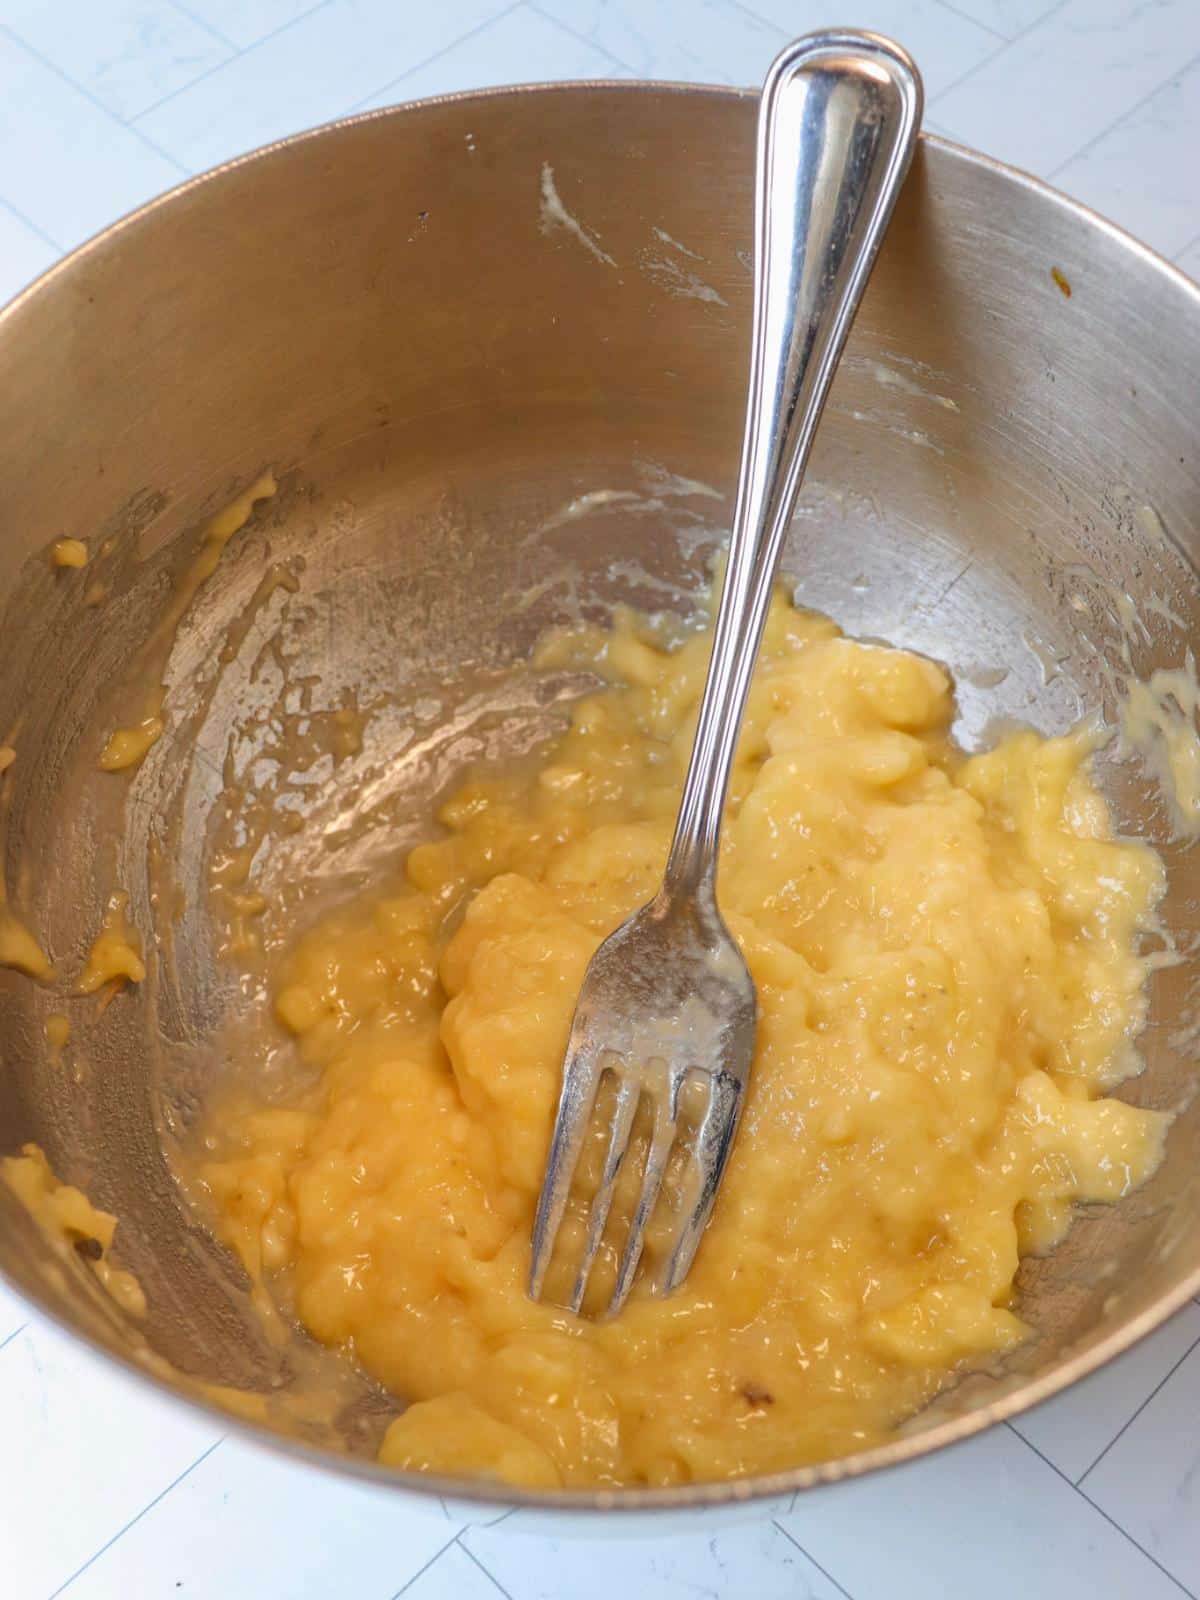 Mashed banana in a mixing bowl with a fork.